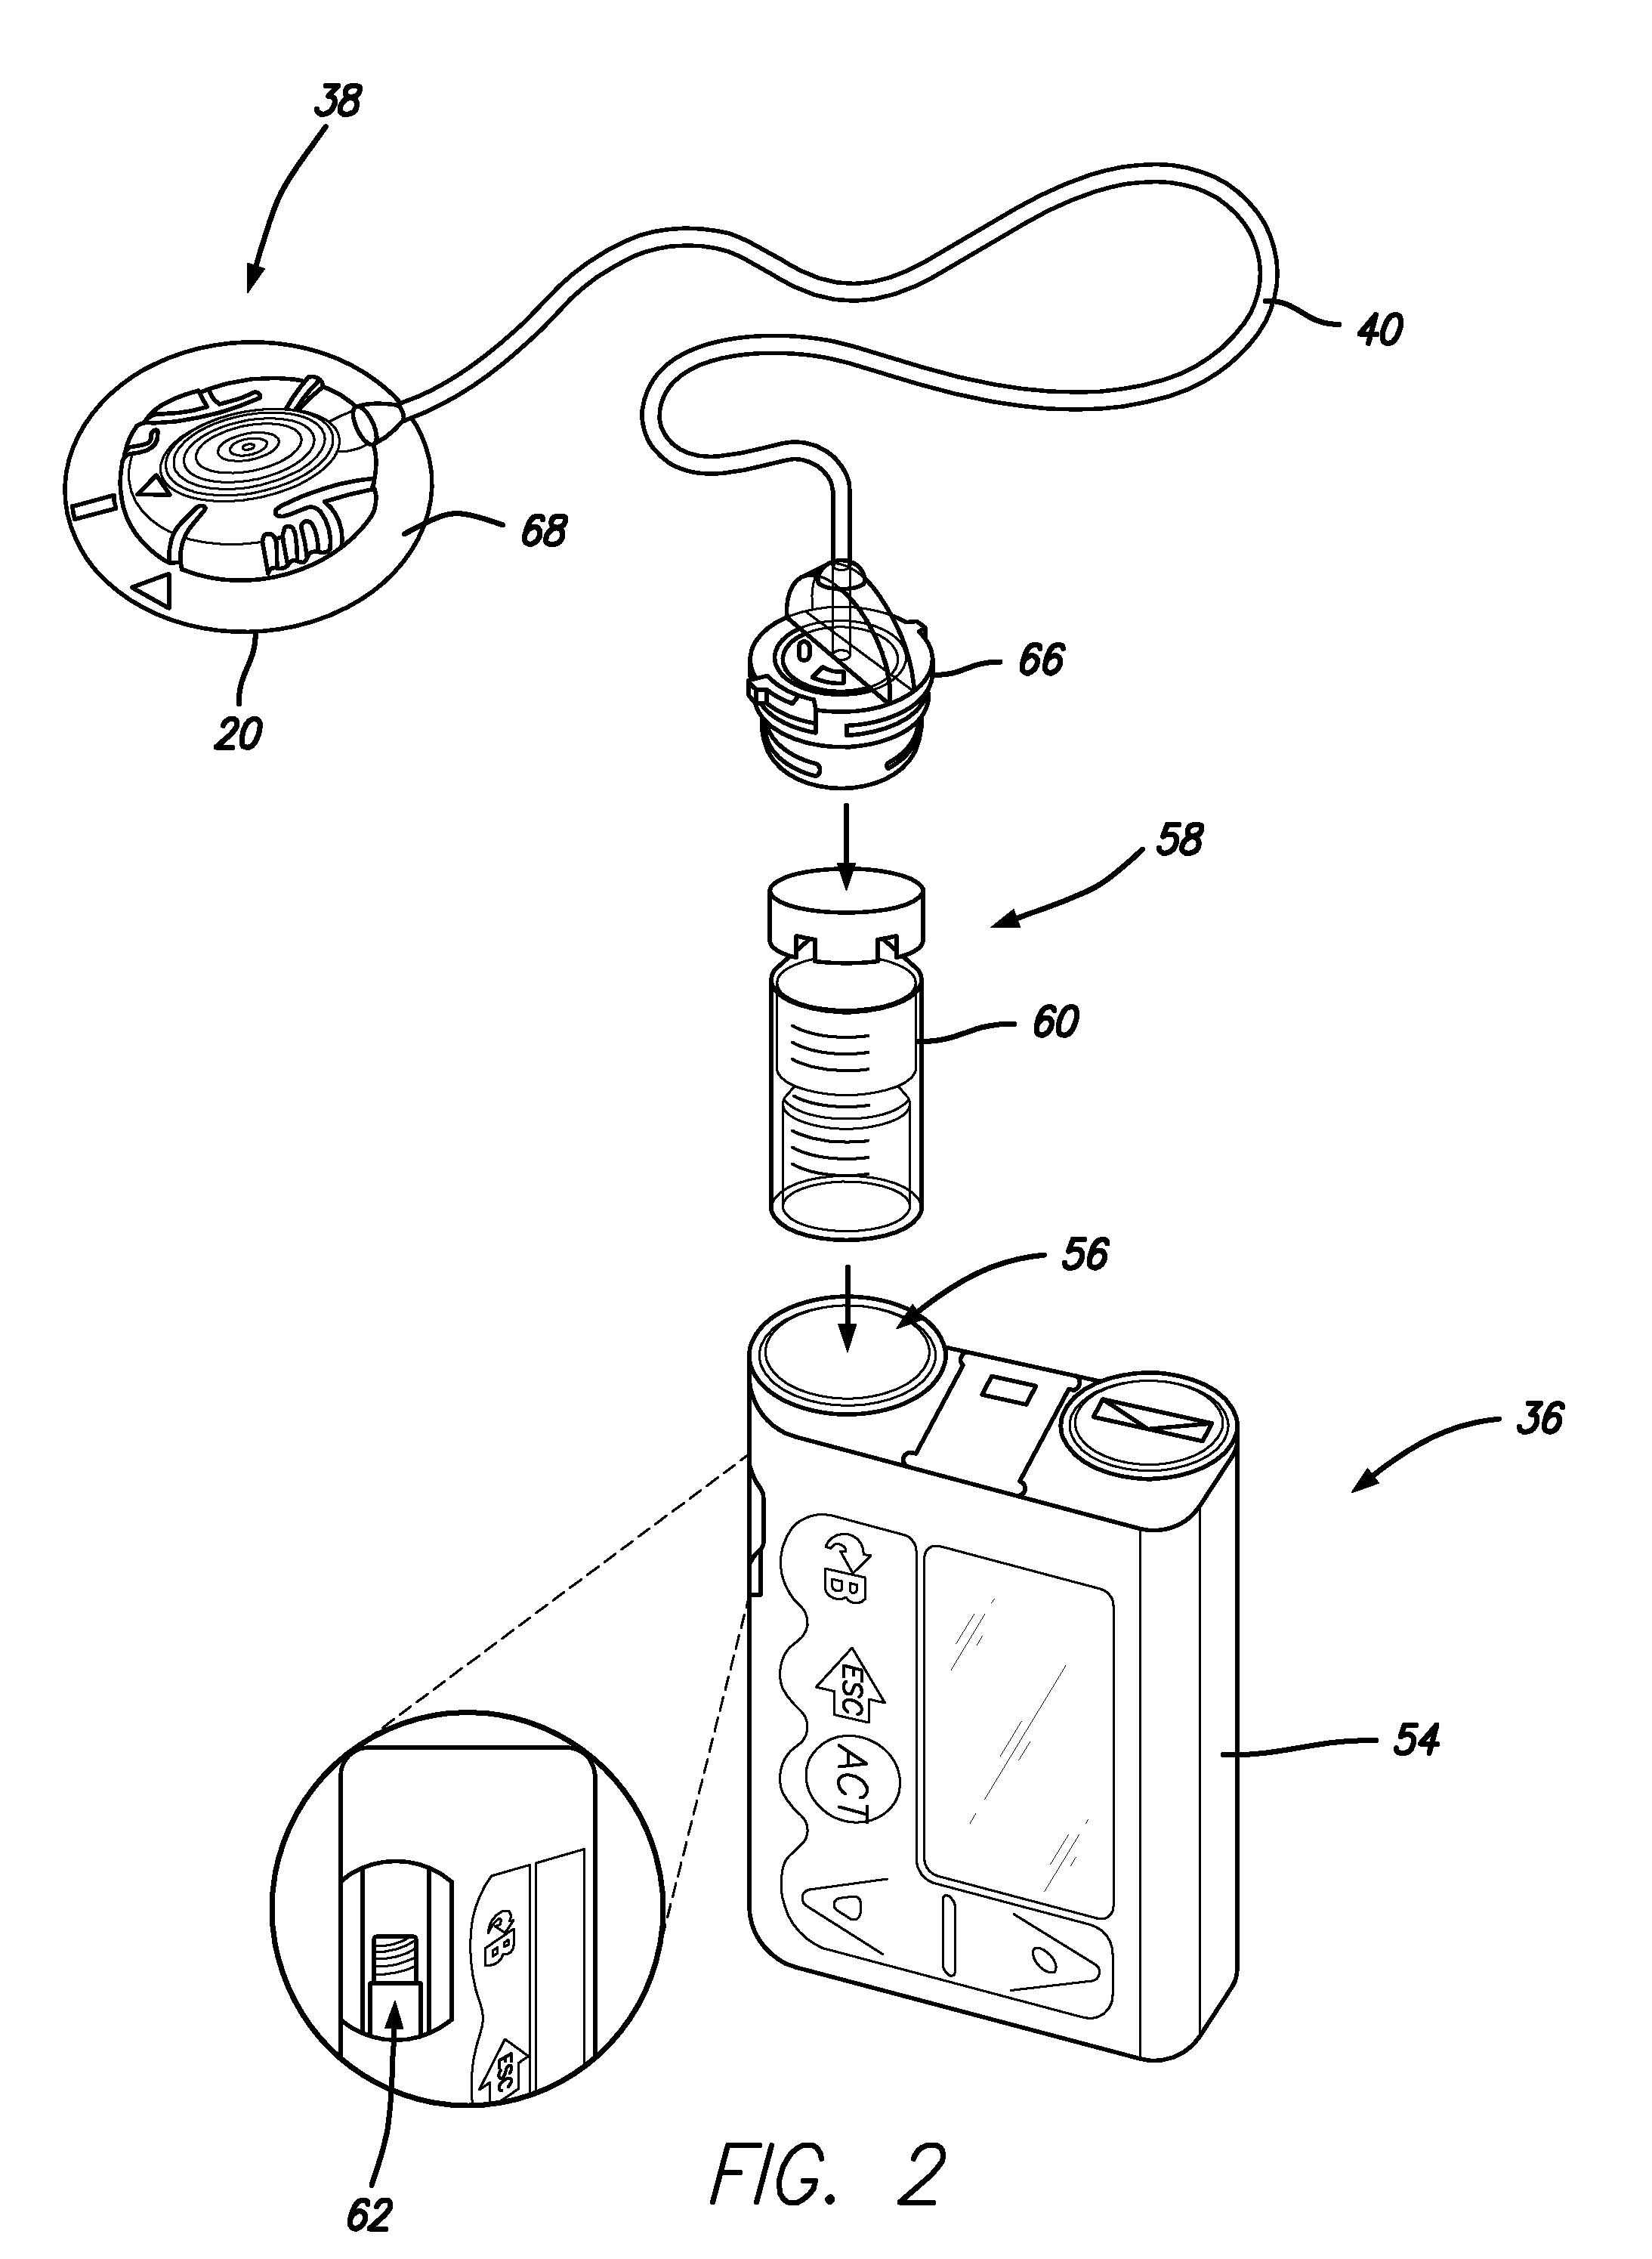 Priming detection system and method of using the same